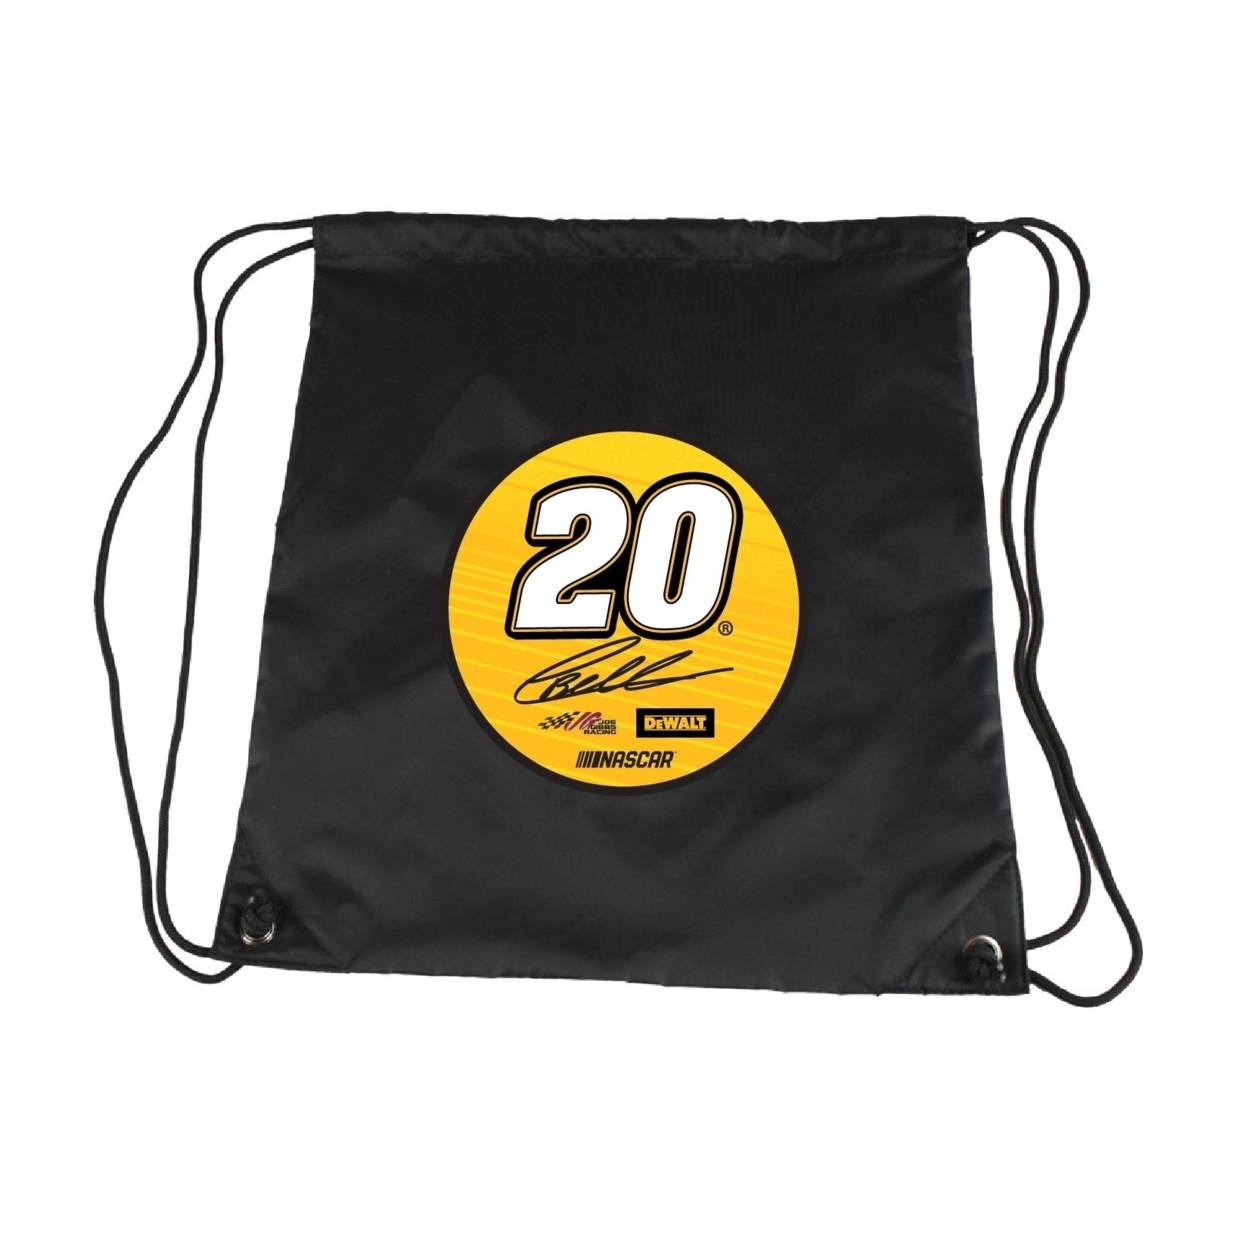 Christopher Bell # 20 Nascar Cinch Bag With Drawstring New For 2021